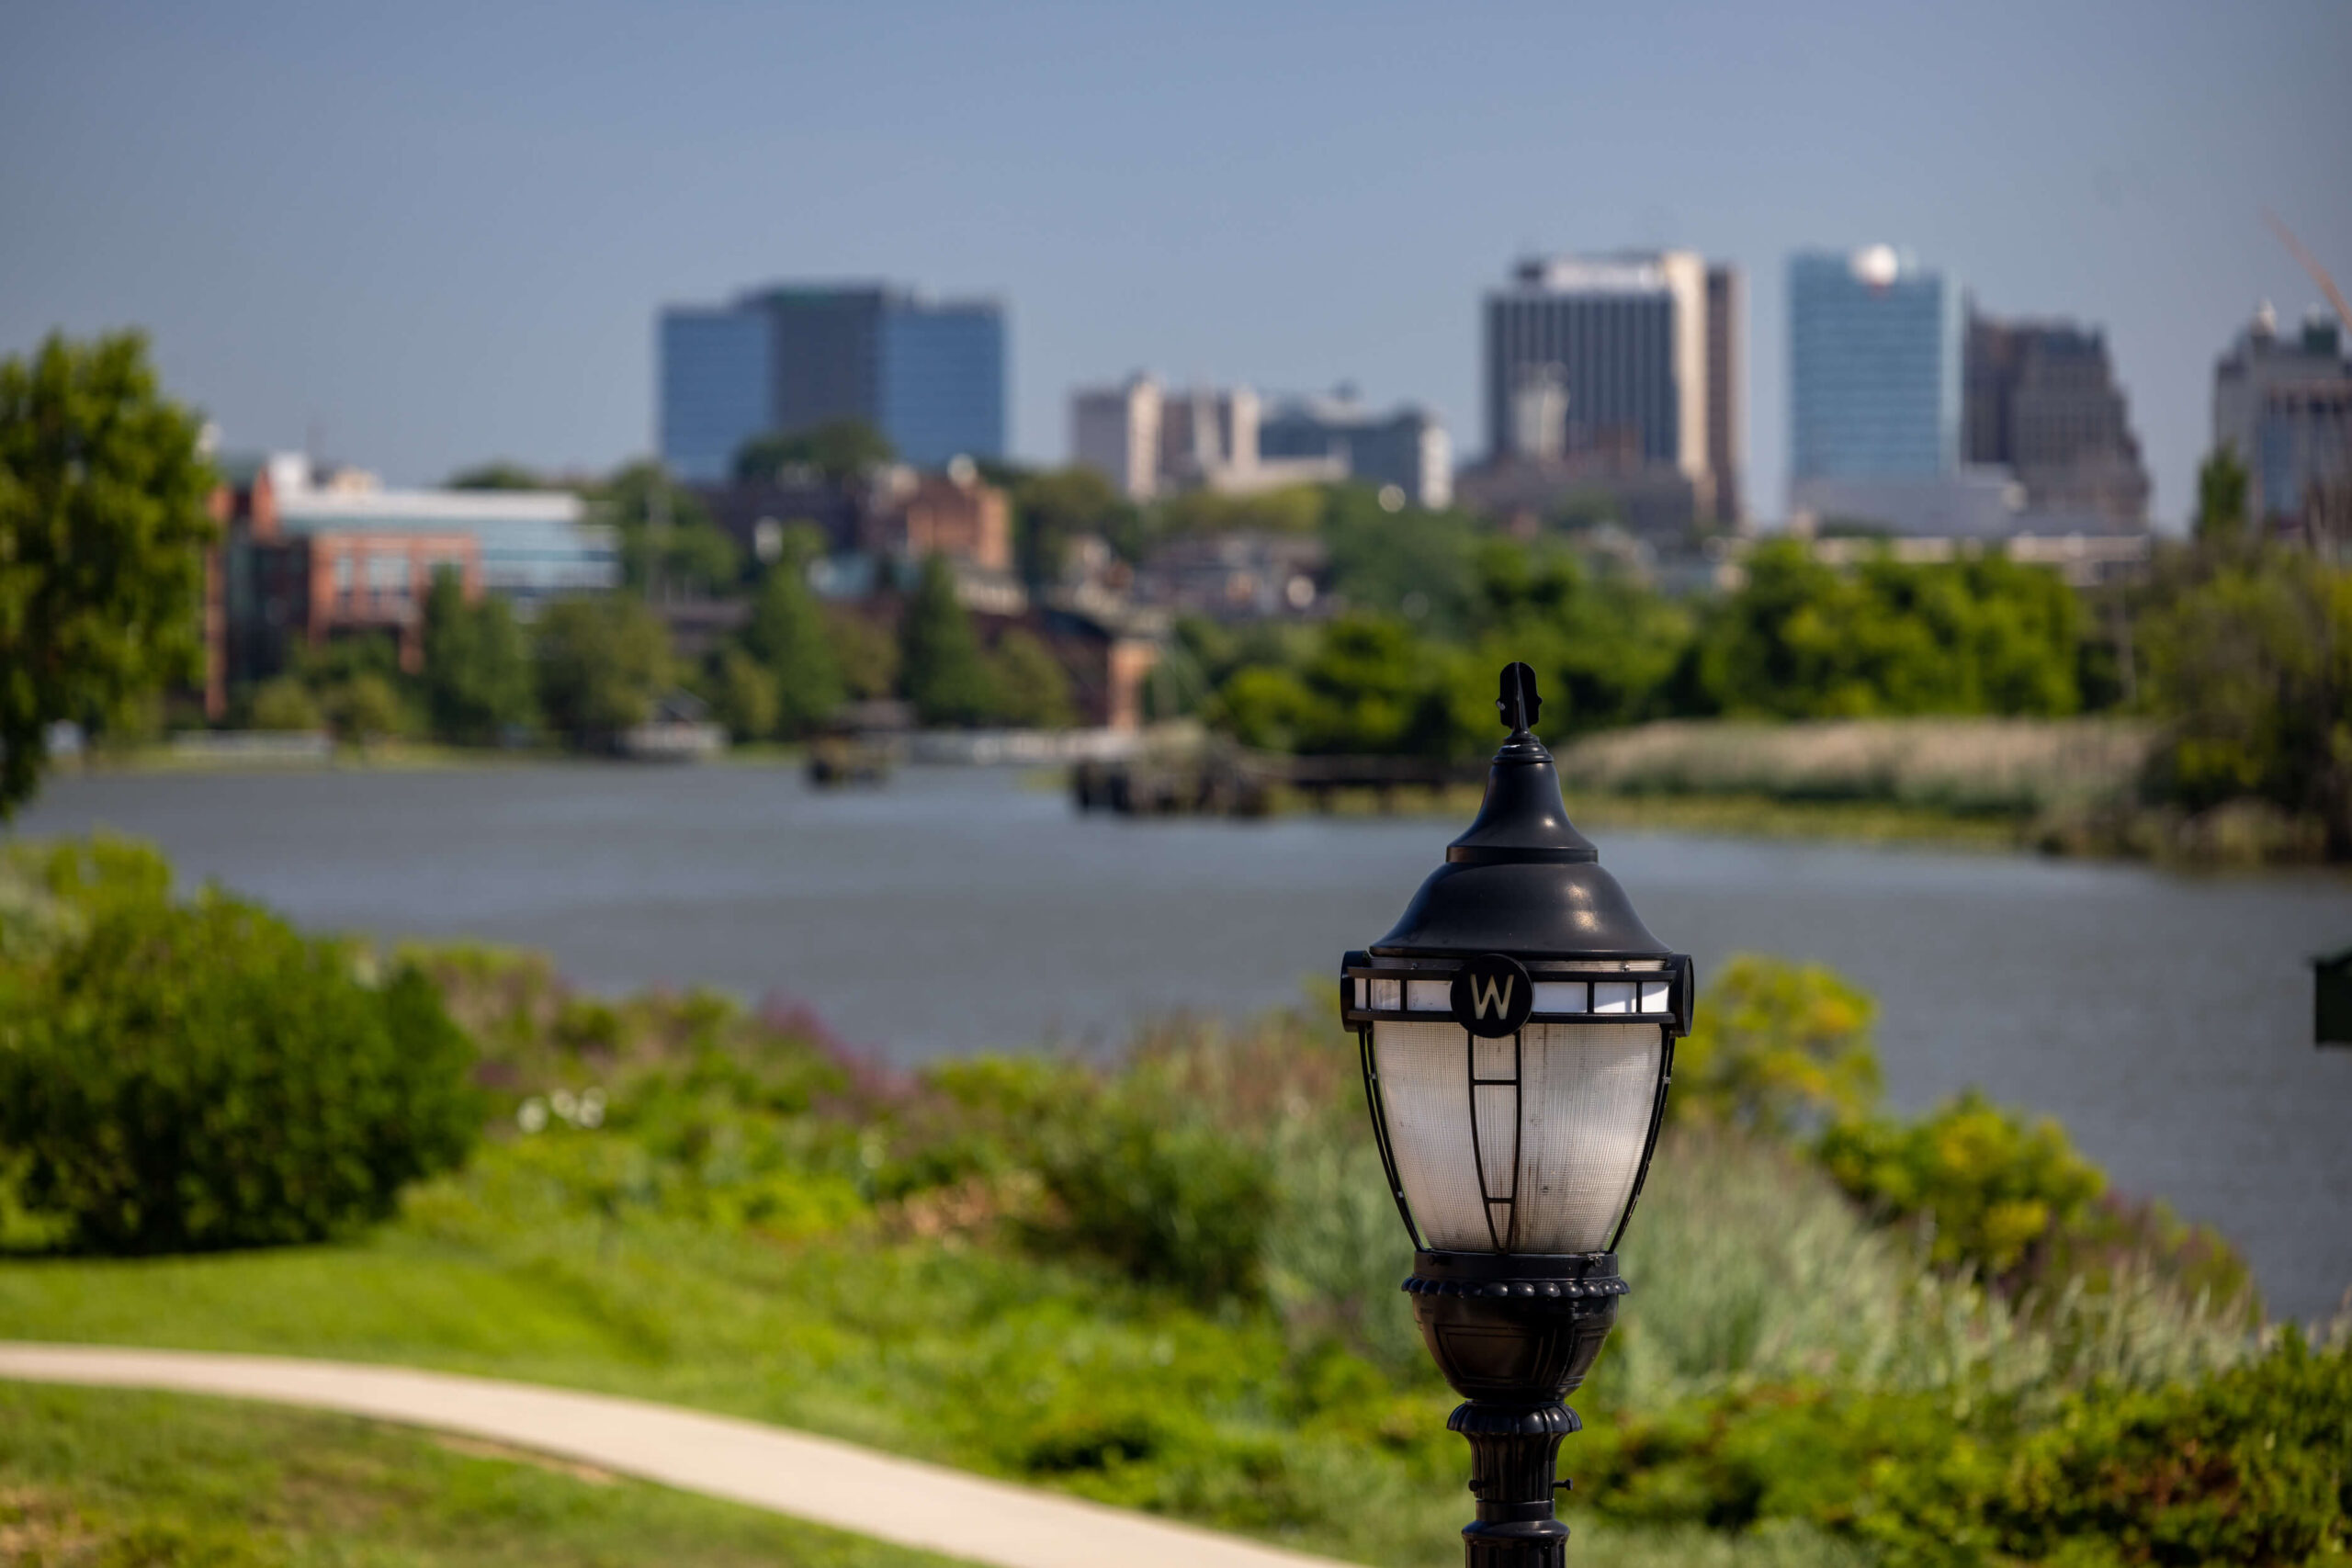 wilmington skyline during the day with a black street light in the foreground